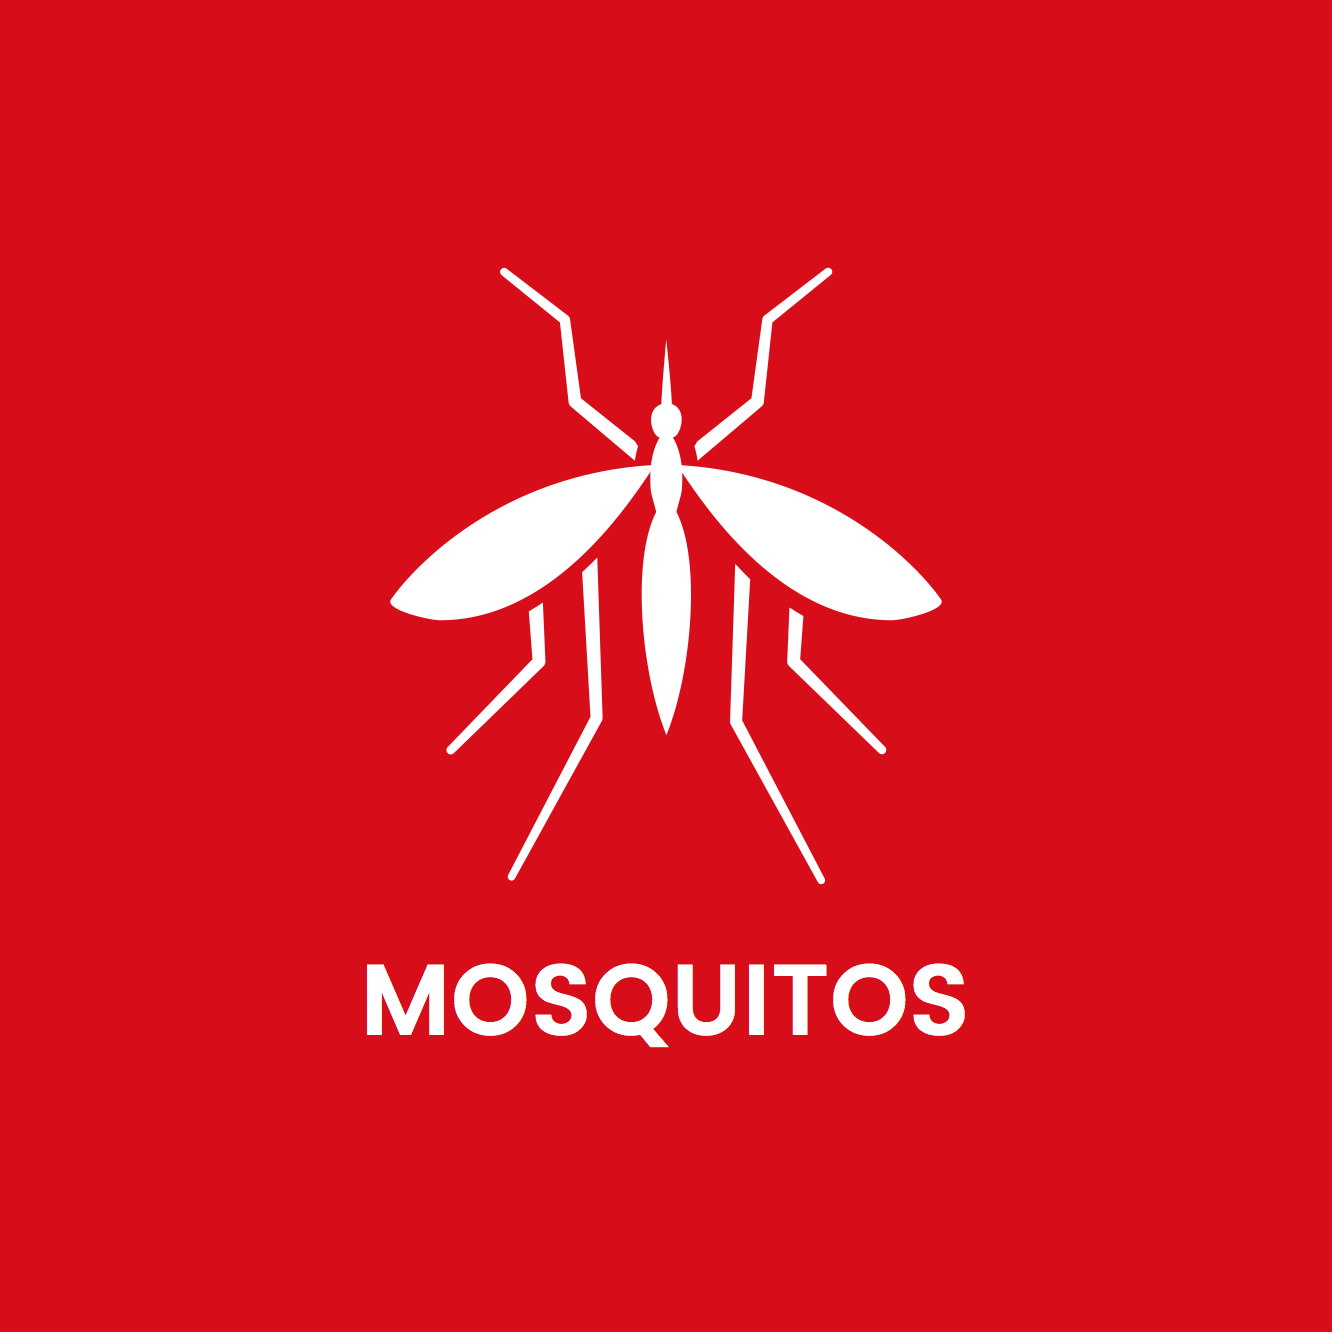 A white mosquito on a red background with the word mosquitos below it.